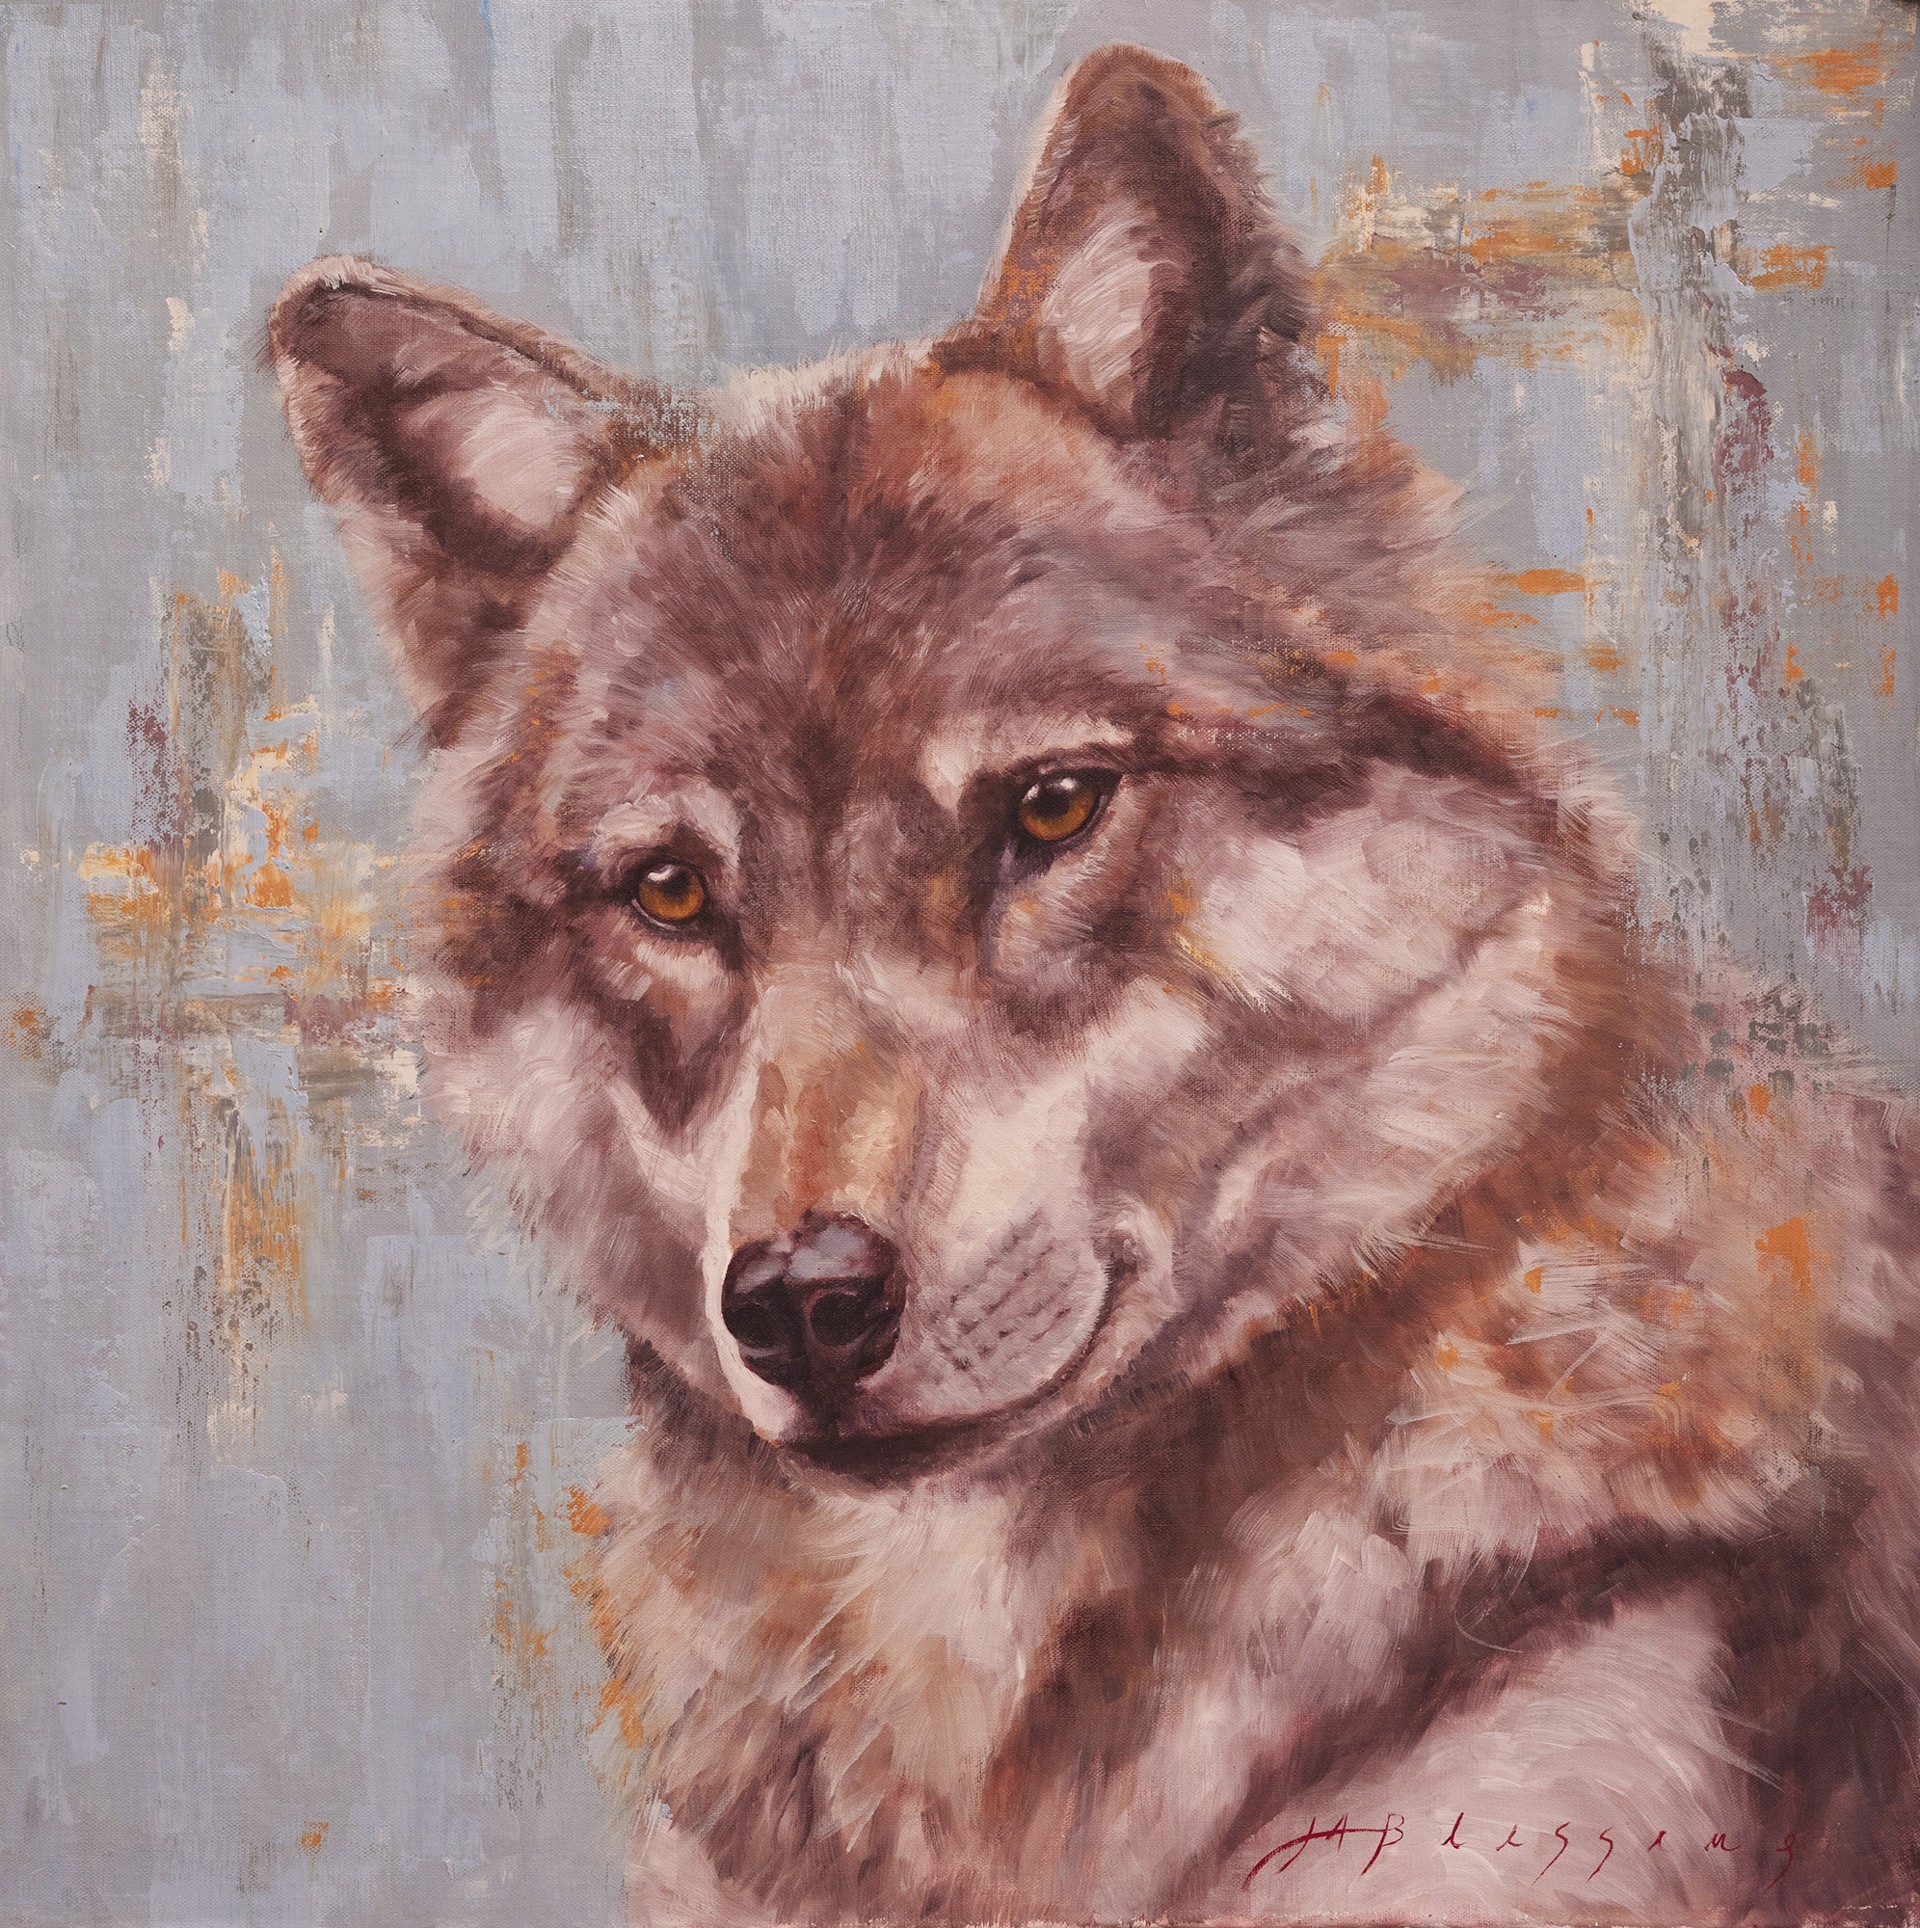 An Original Oil Painting OF a Wolf Portrait With A Contemporary Abstract Background, By Meagan Blessing